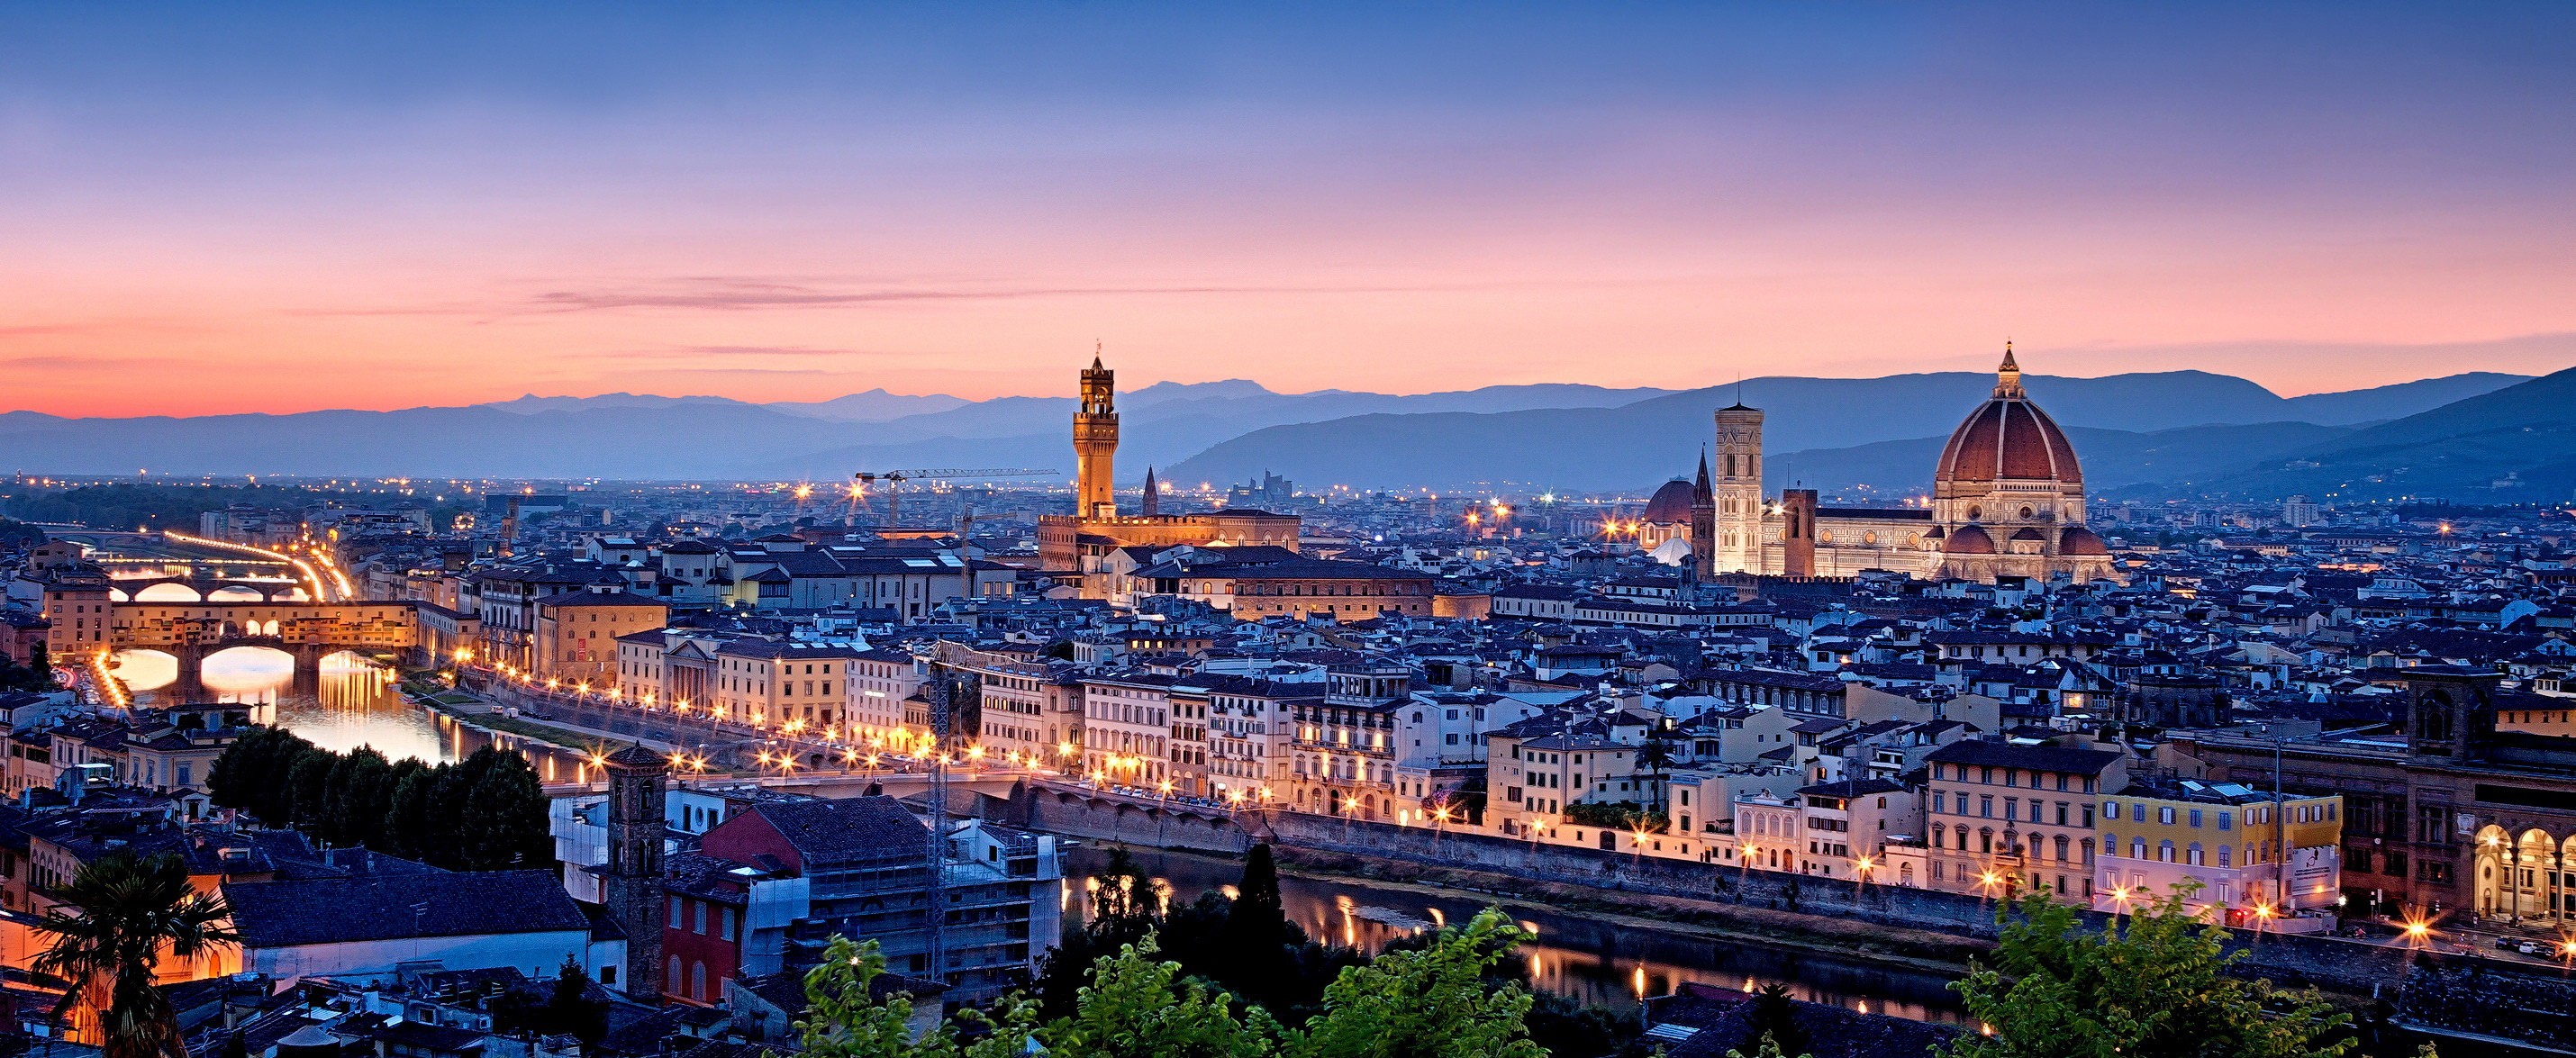 italy, tuscany, florence, man made, cities